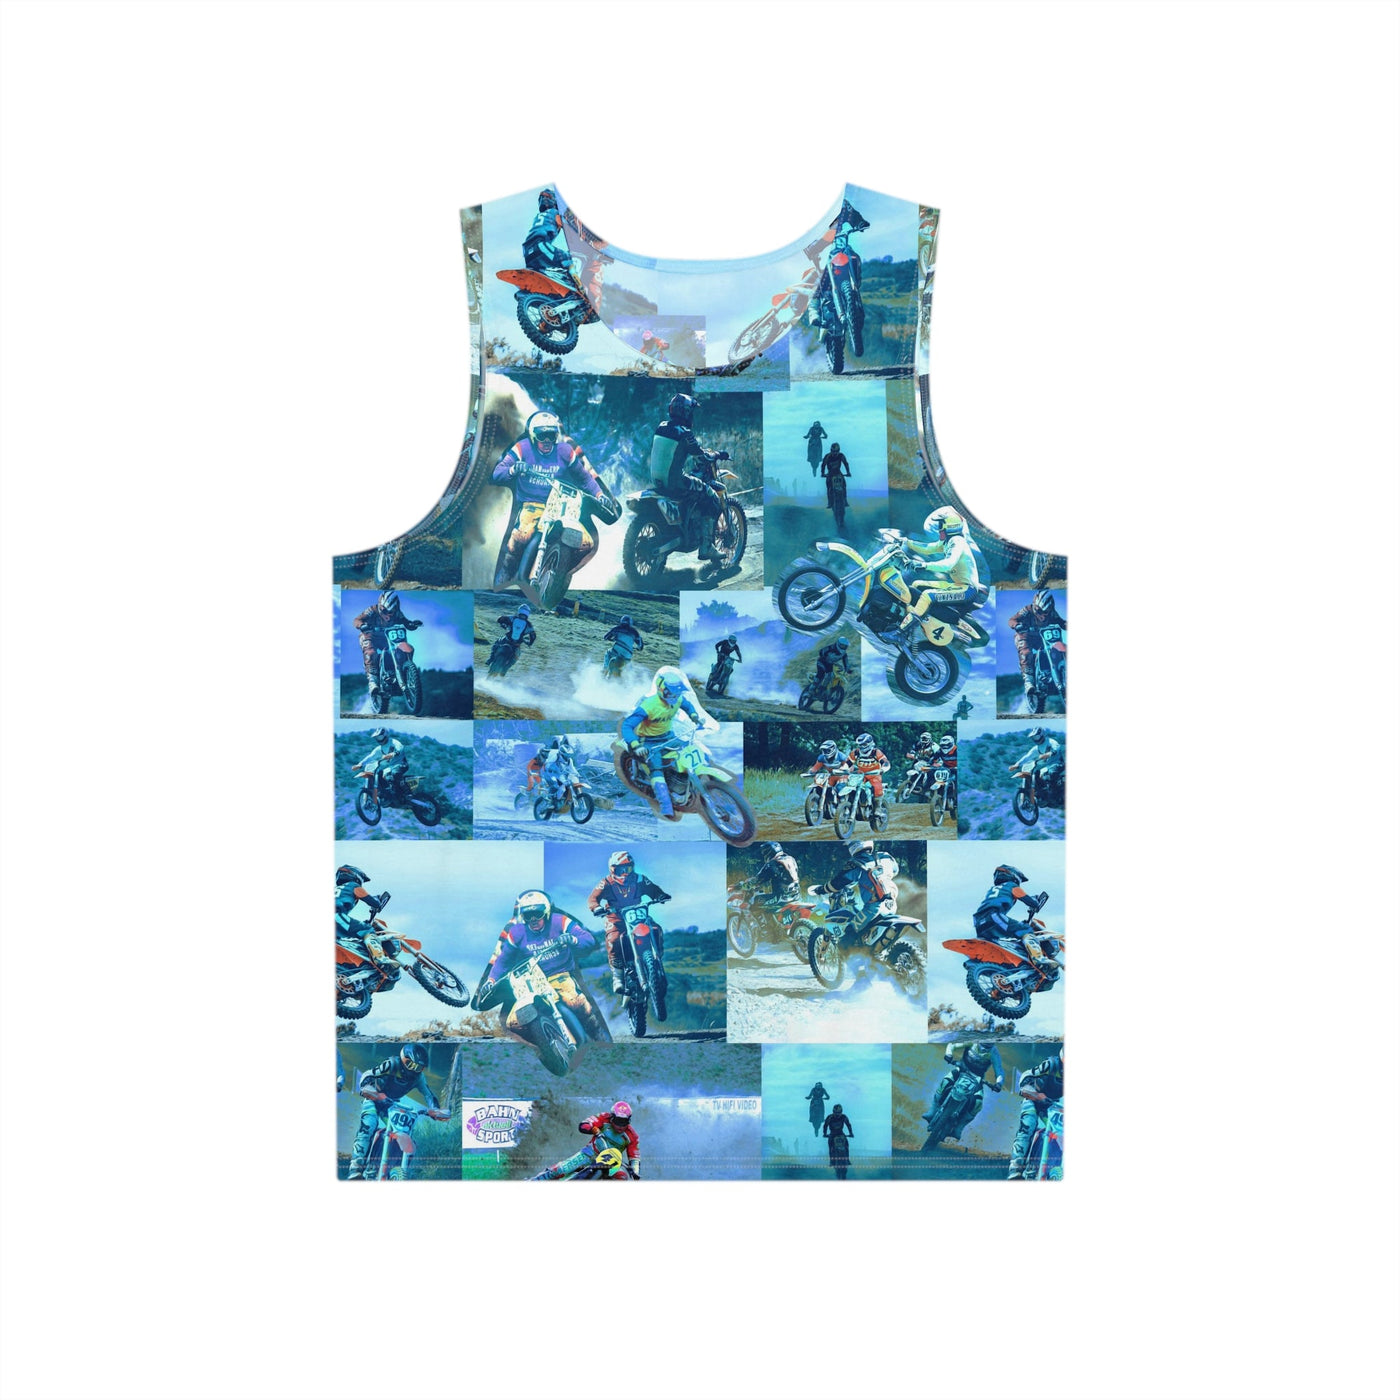 Tyler Durden Tank Top with Motocross Collage - Fight Club Fashion